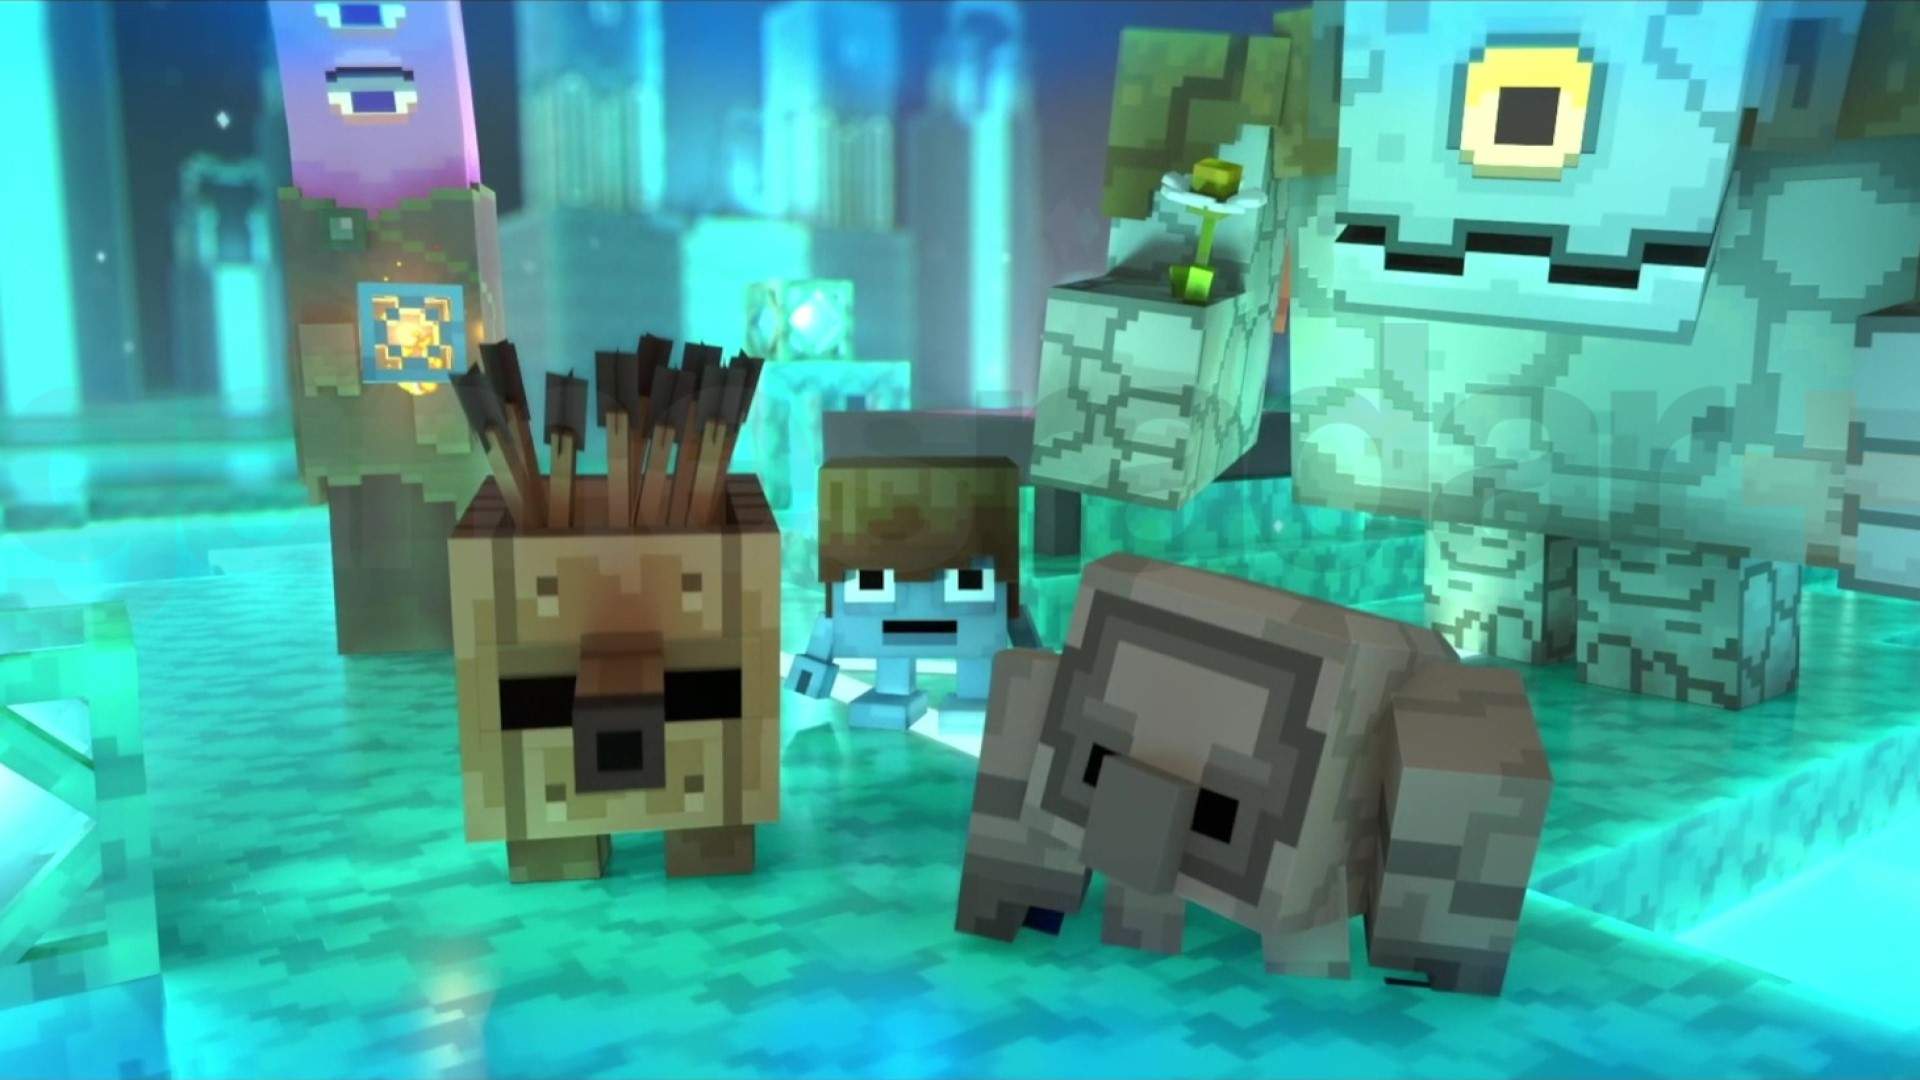 Minecraft Legends: How to Control and Direct Mobs